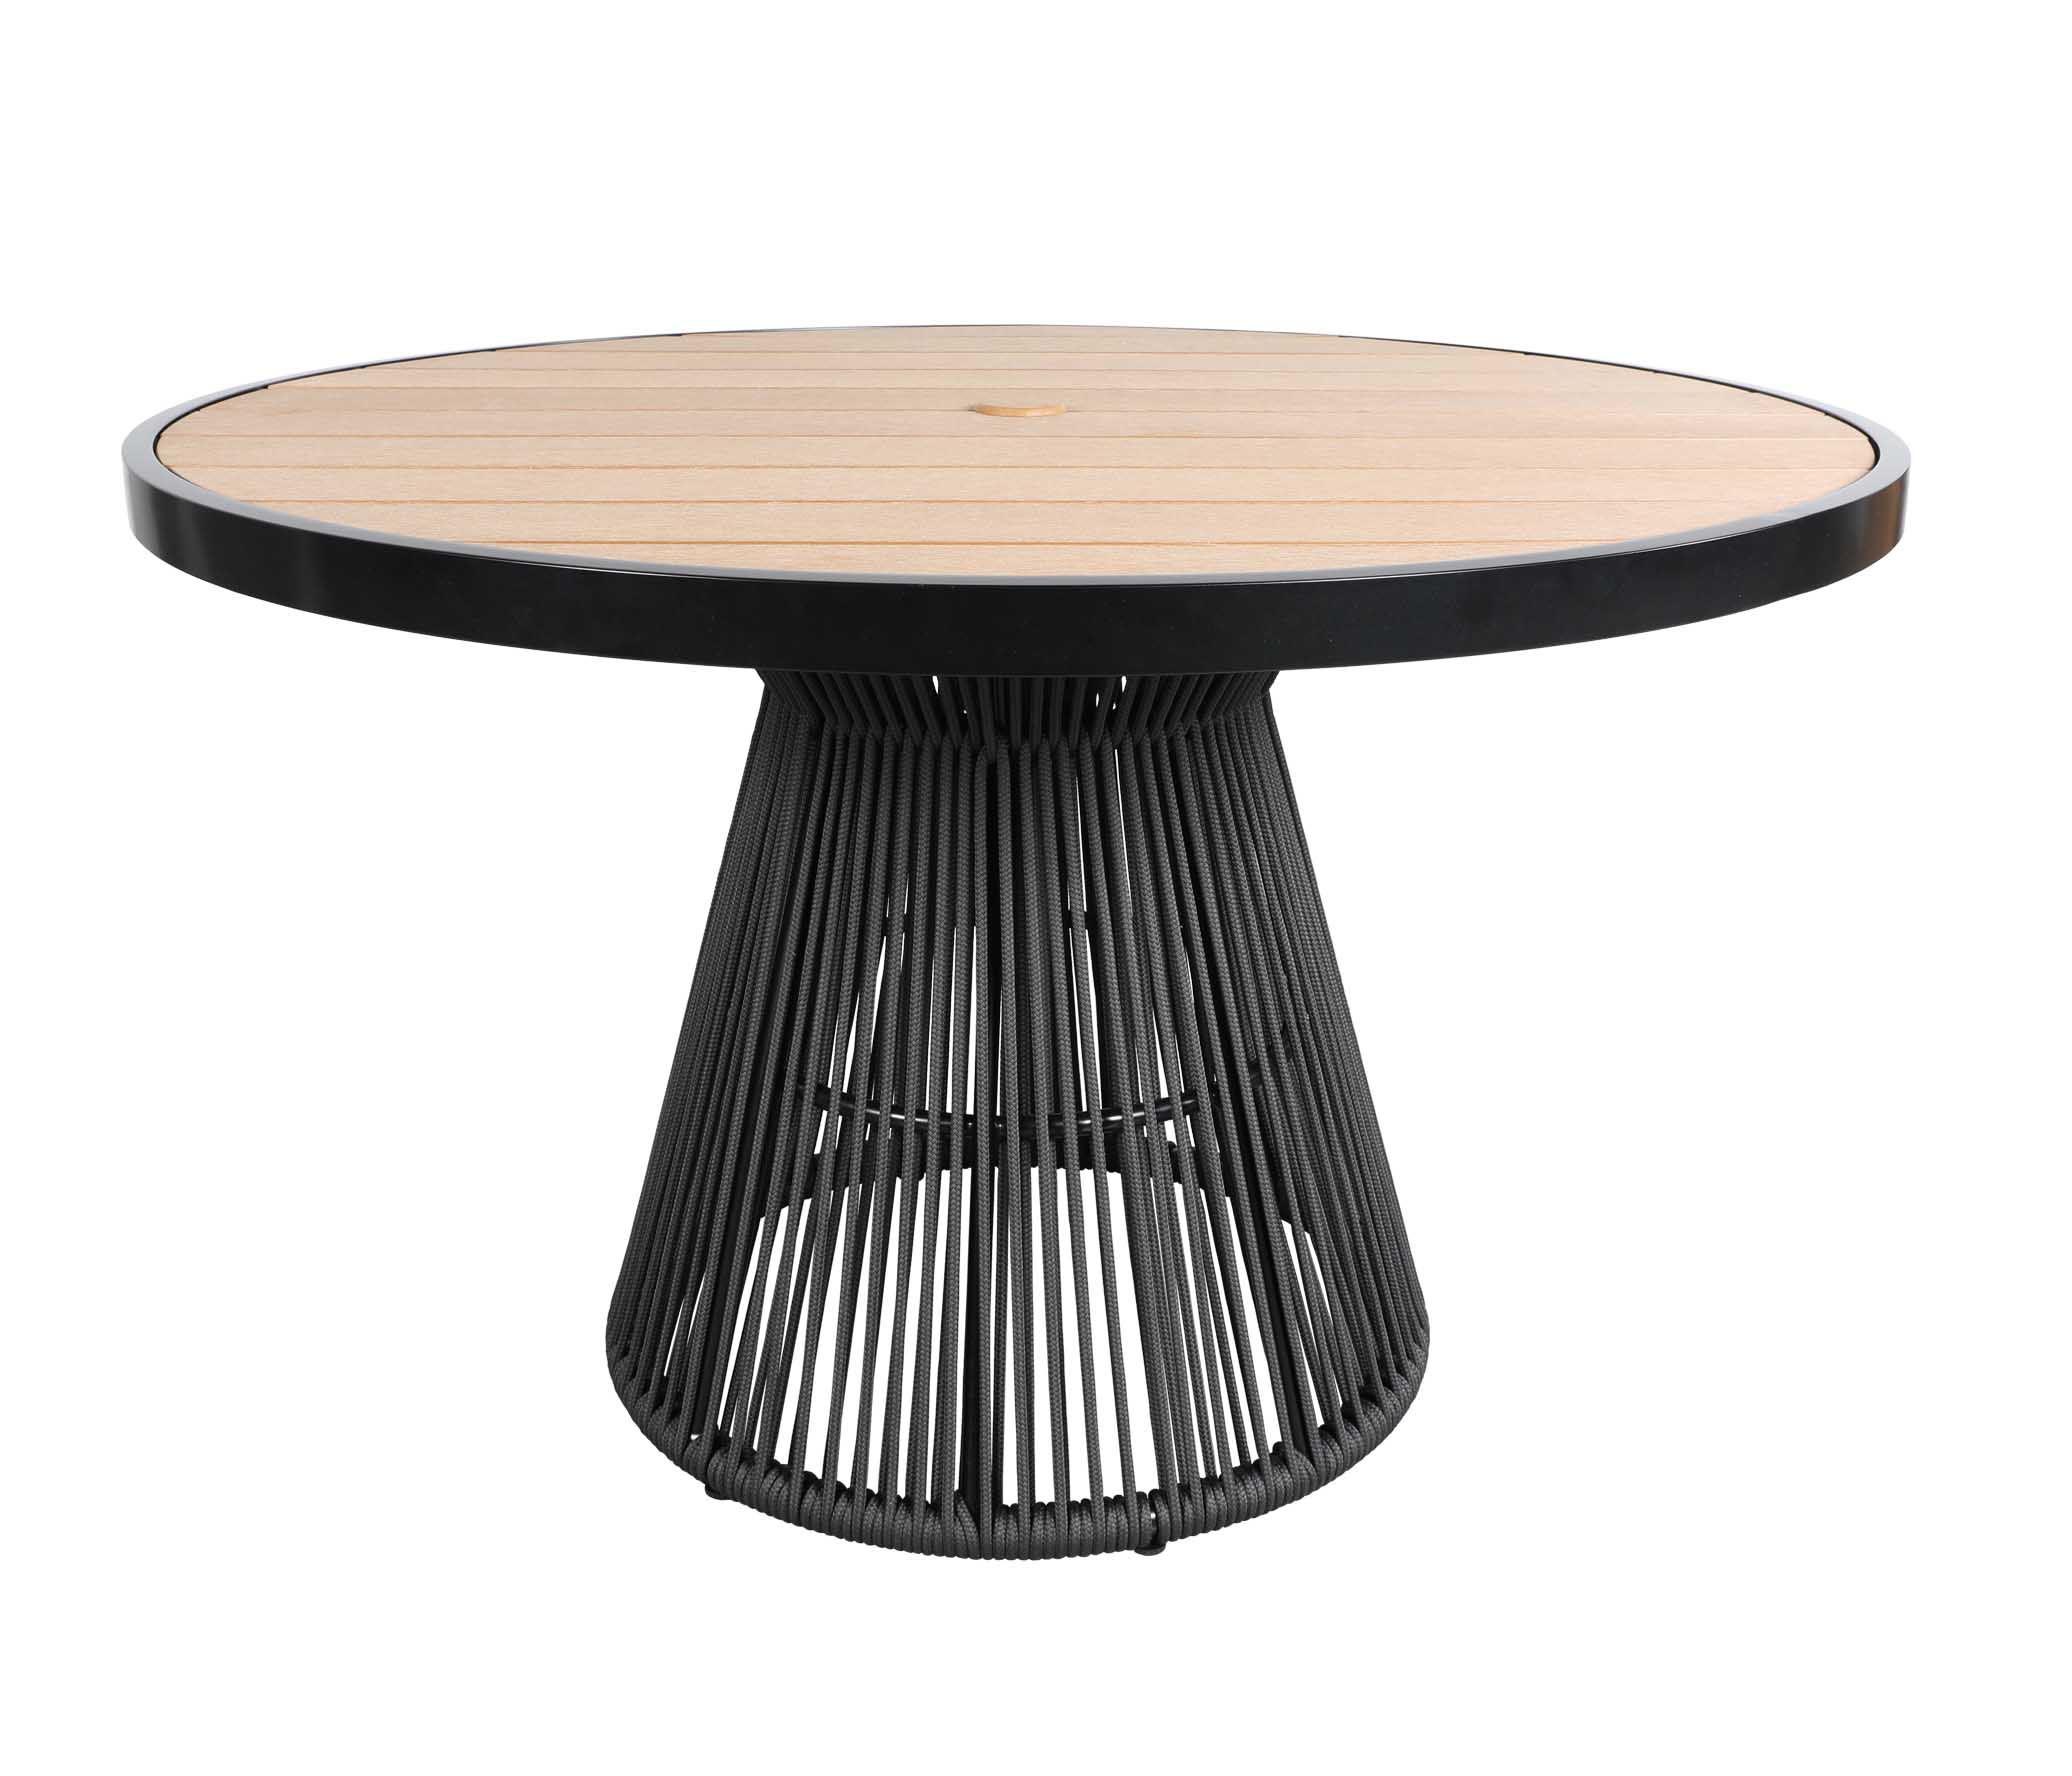 Outdoor Dining Tables, Round Outdoor Dining Table Canada